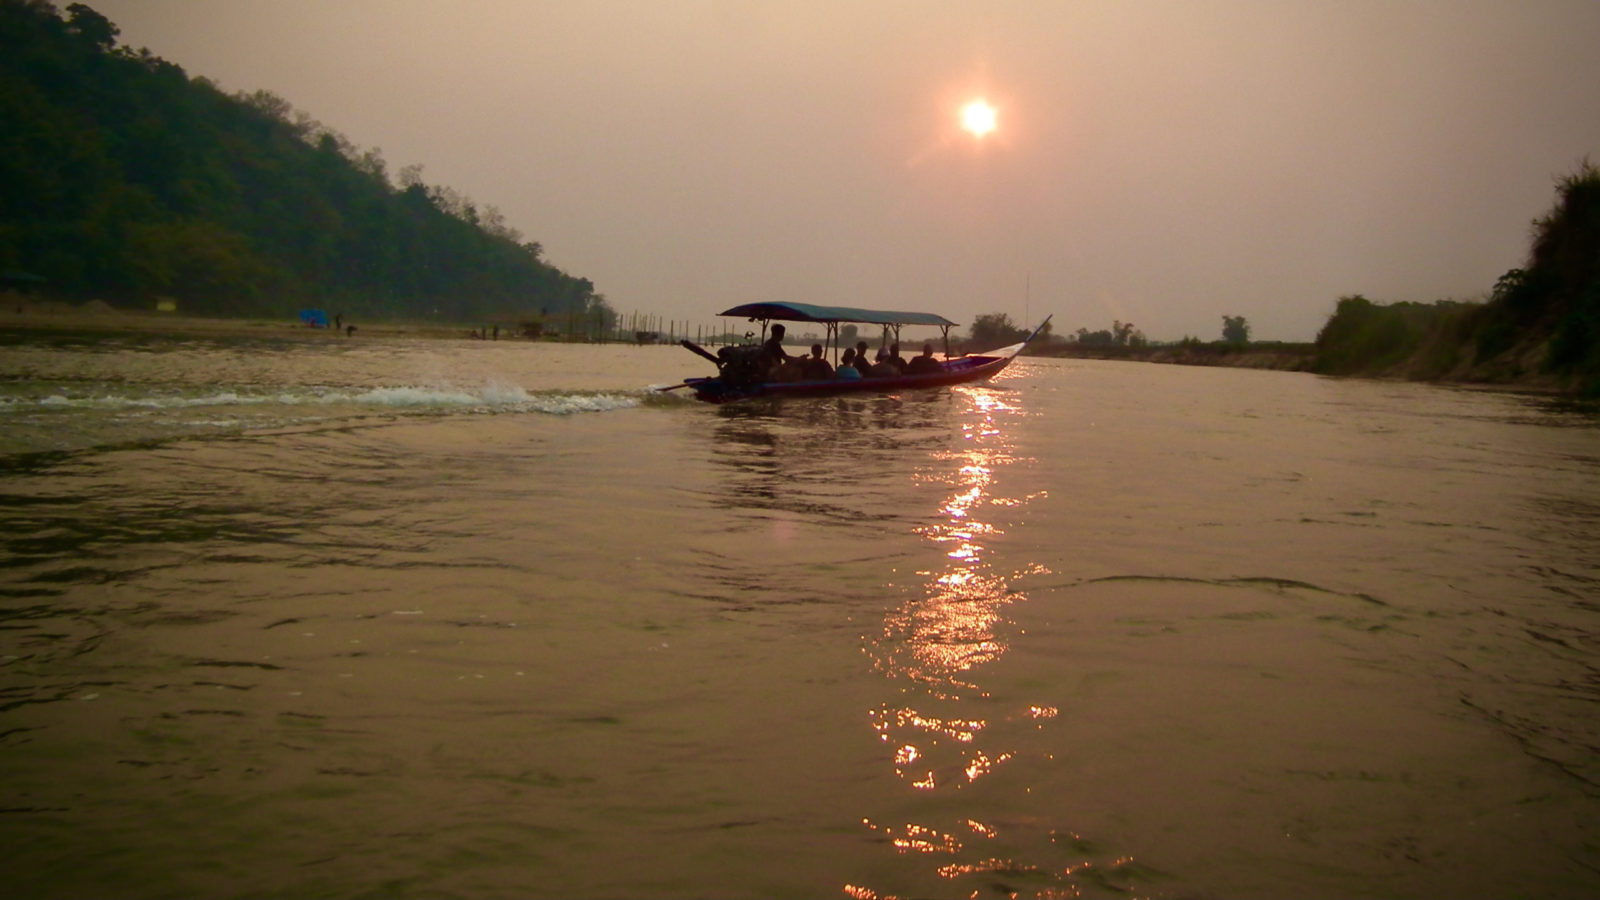 RIver Boat on the Mekong River